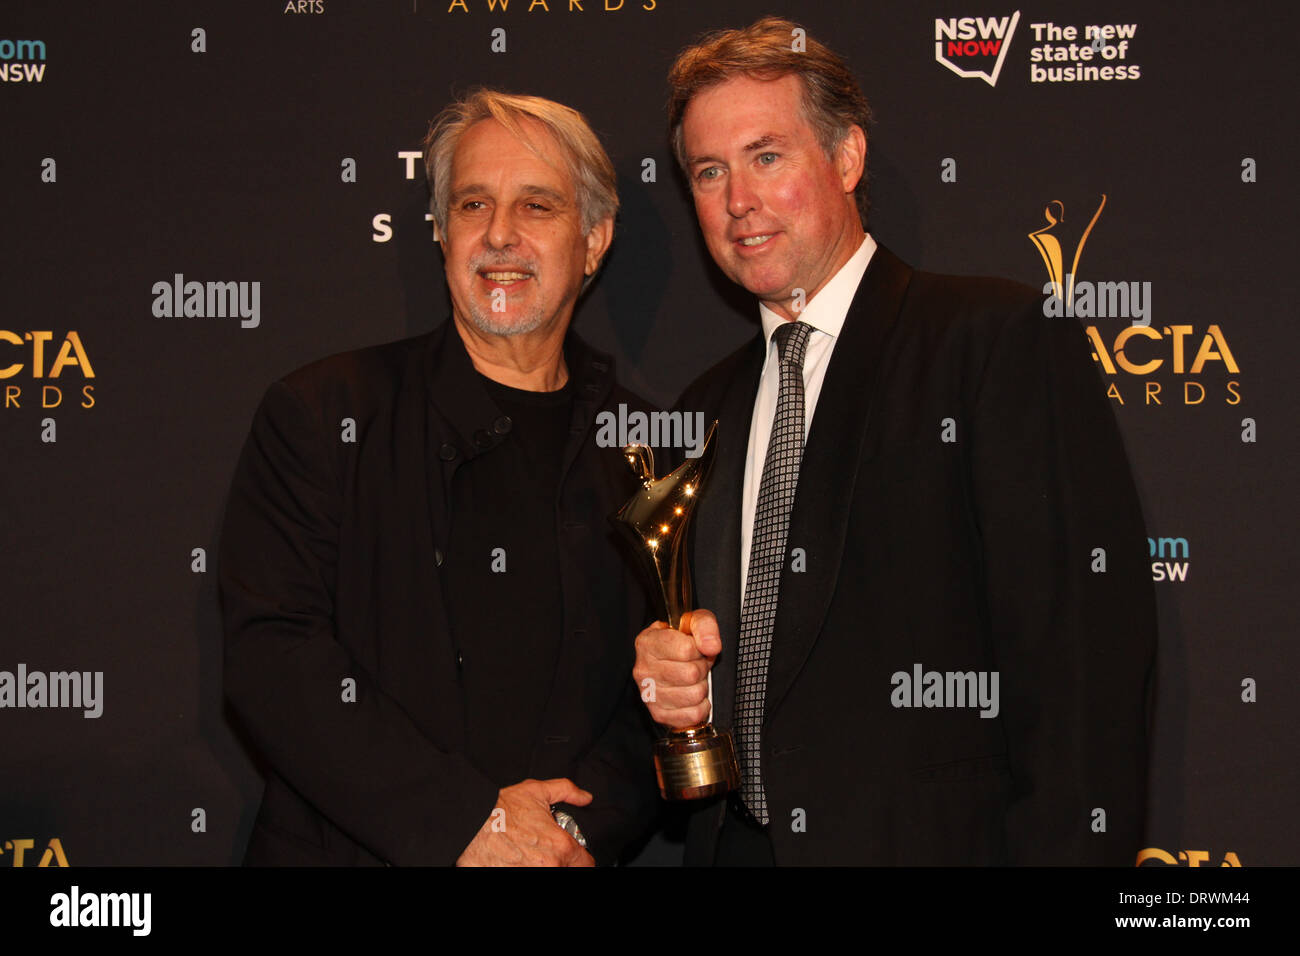 David Roach (L) and Warwick Ross (R) with their AACTA Award for Best Feature Length Documentary: Red Obsession. Stock Photo